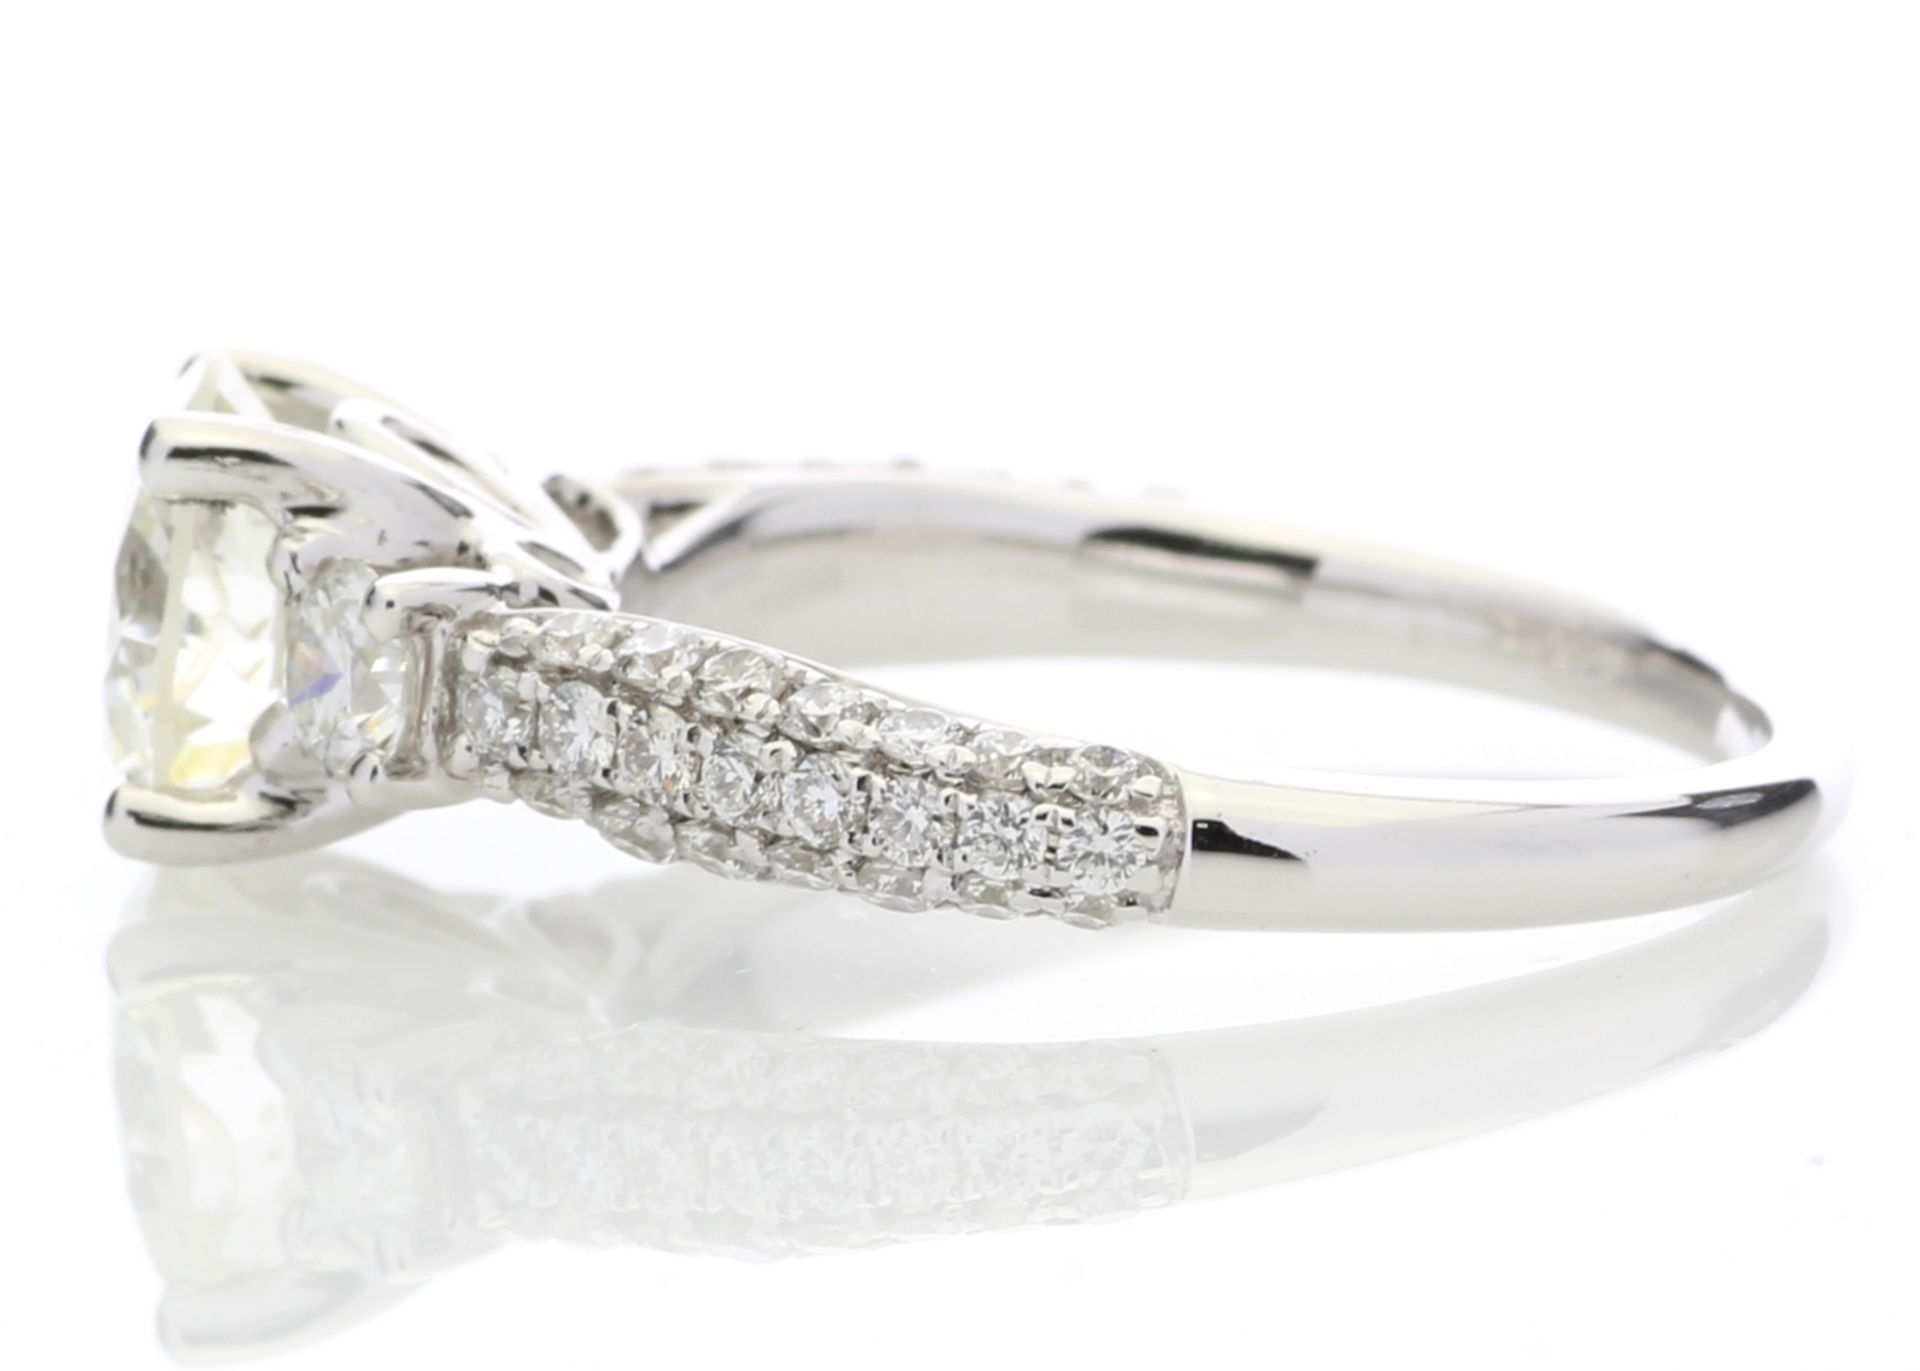 18ct White Gold Single Stone Claw Set With Stone Set Shoulders Diamond Ring (1.40) 2.07 - Image 2 of 4